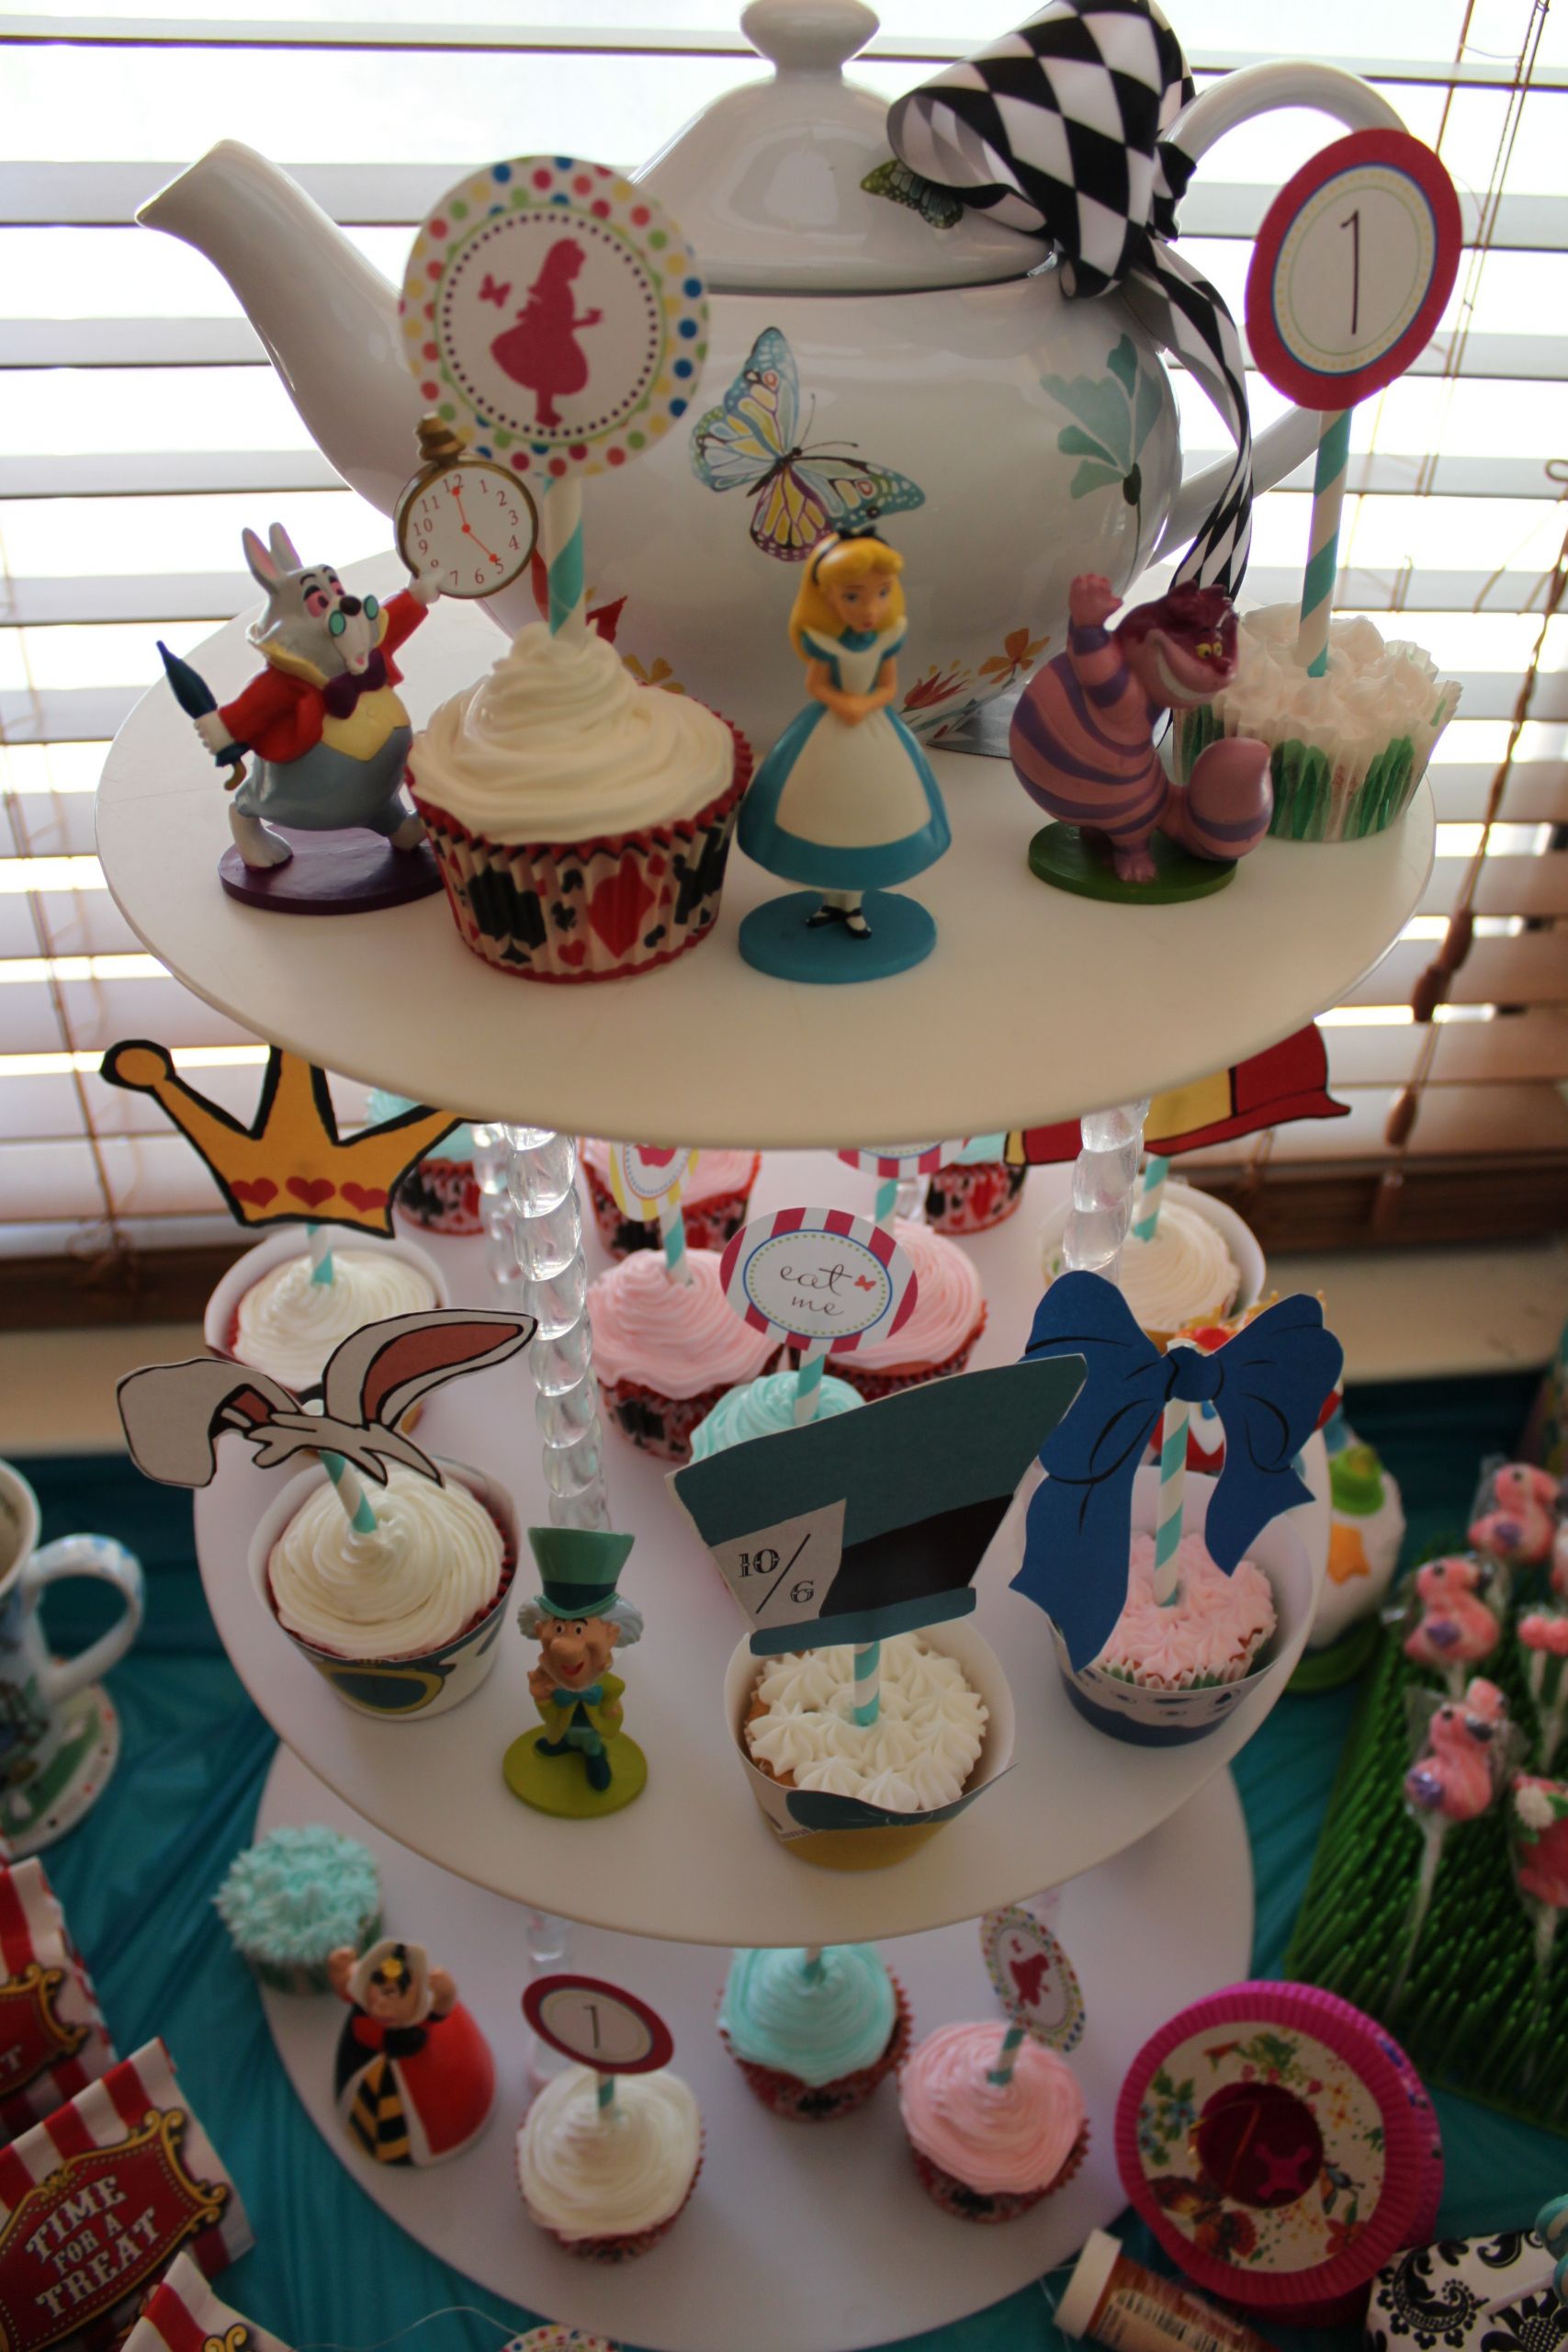 Decoration Ideas For Birthday Party
 e Year Old Birthday Party Alice in “ e”derland Theme